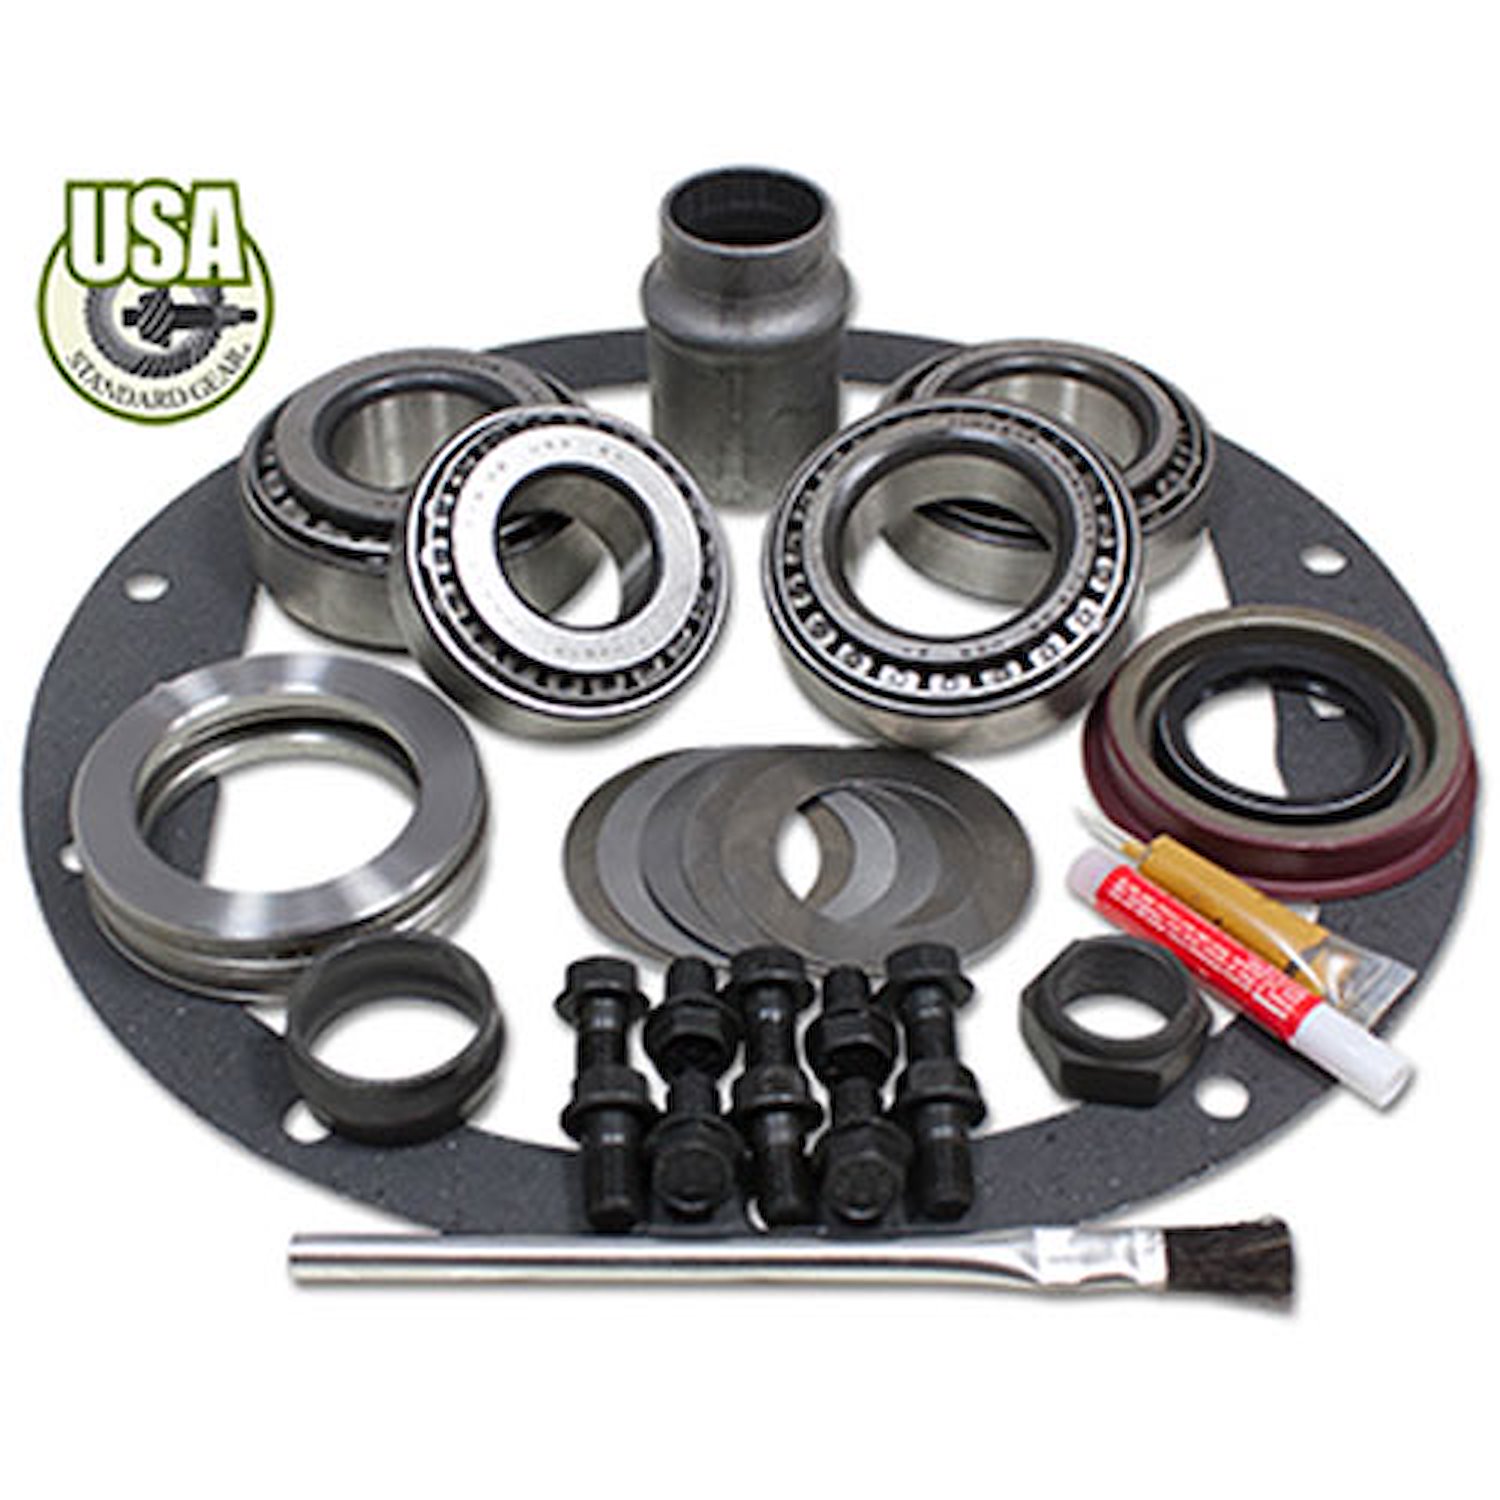 USA Standard Master Overhaul Kit Ford 10.25" Differential